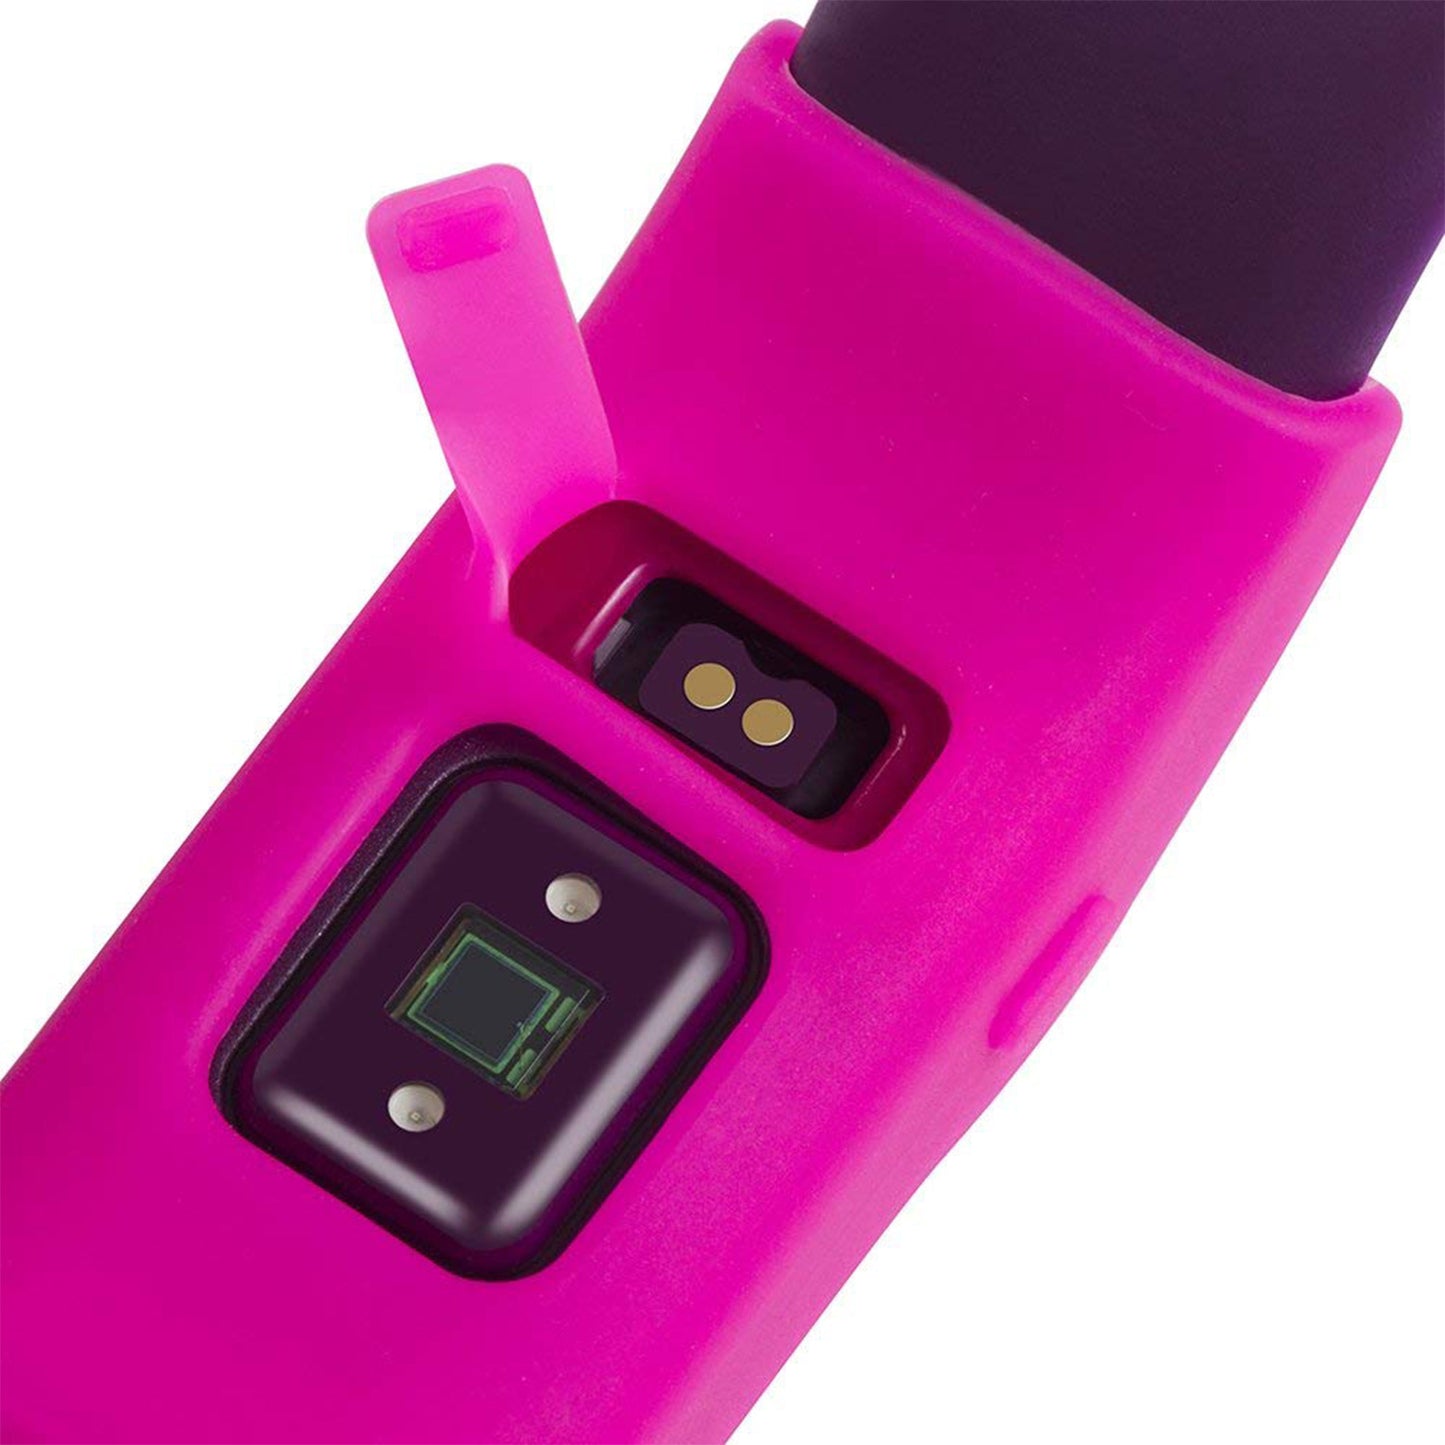 Rubber Protective Case for Fitbit Charge HR